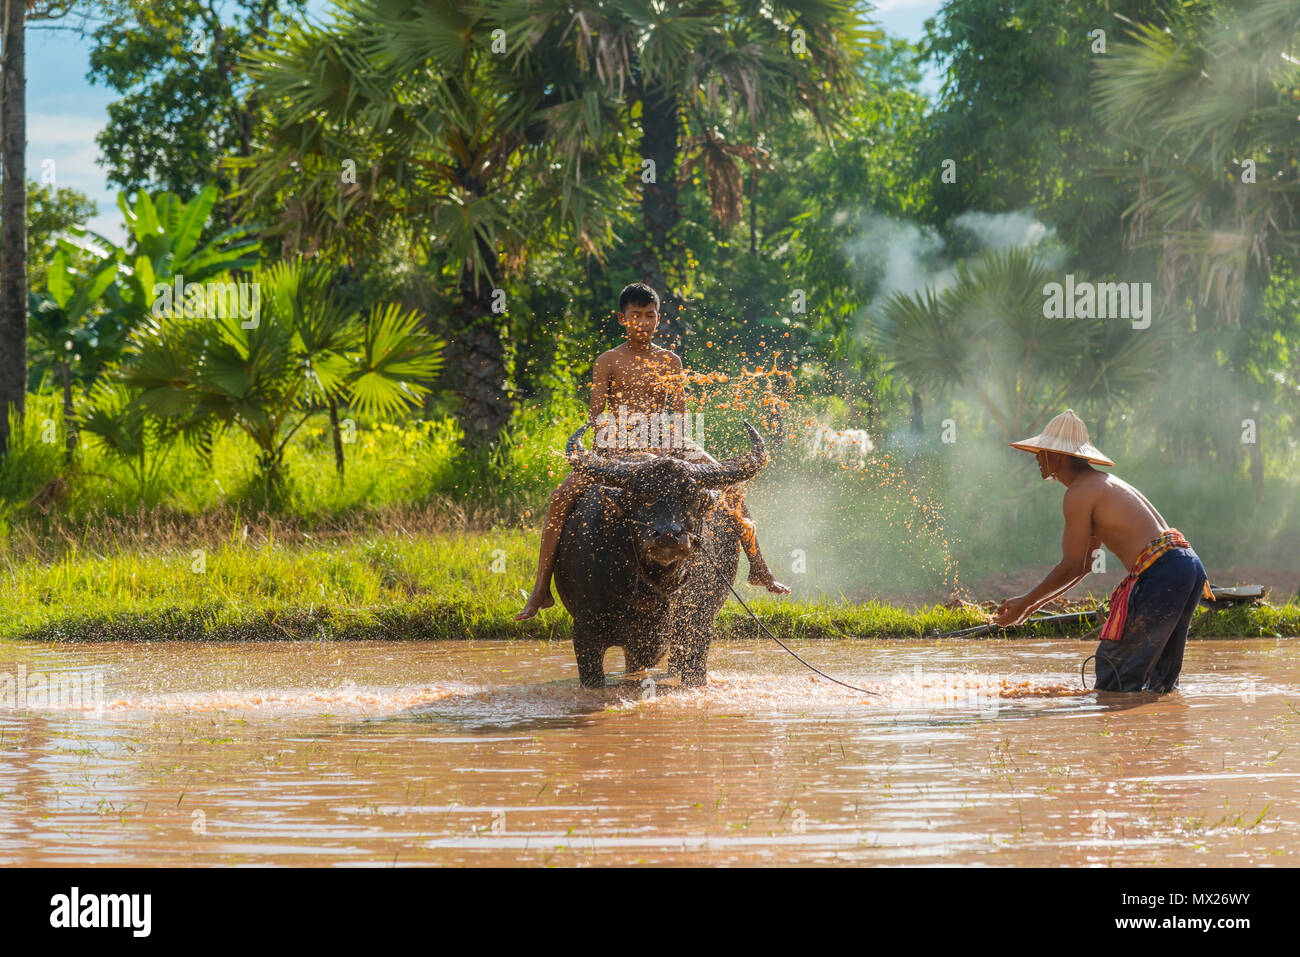 Saknonakhon, Thailand - July 30, 2016: Farmer dipping water and throwing to bath buffalo riding by a boy in rice farm in rural of Sakonnakhon, Thailan Stock Photo